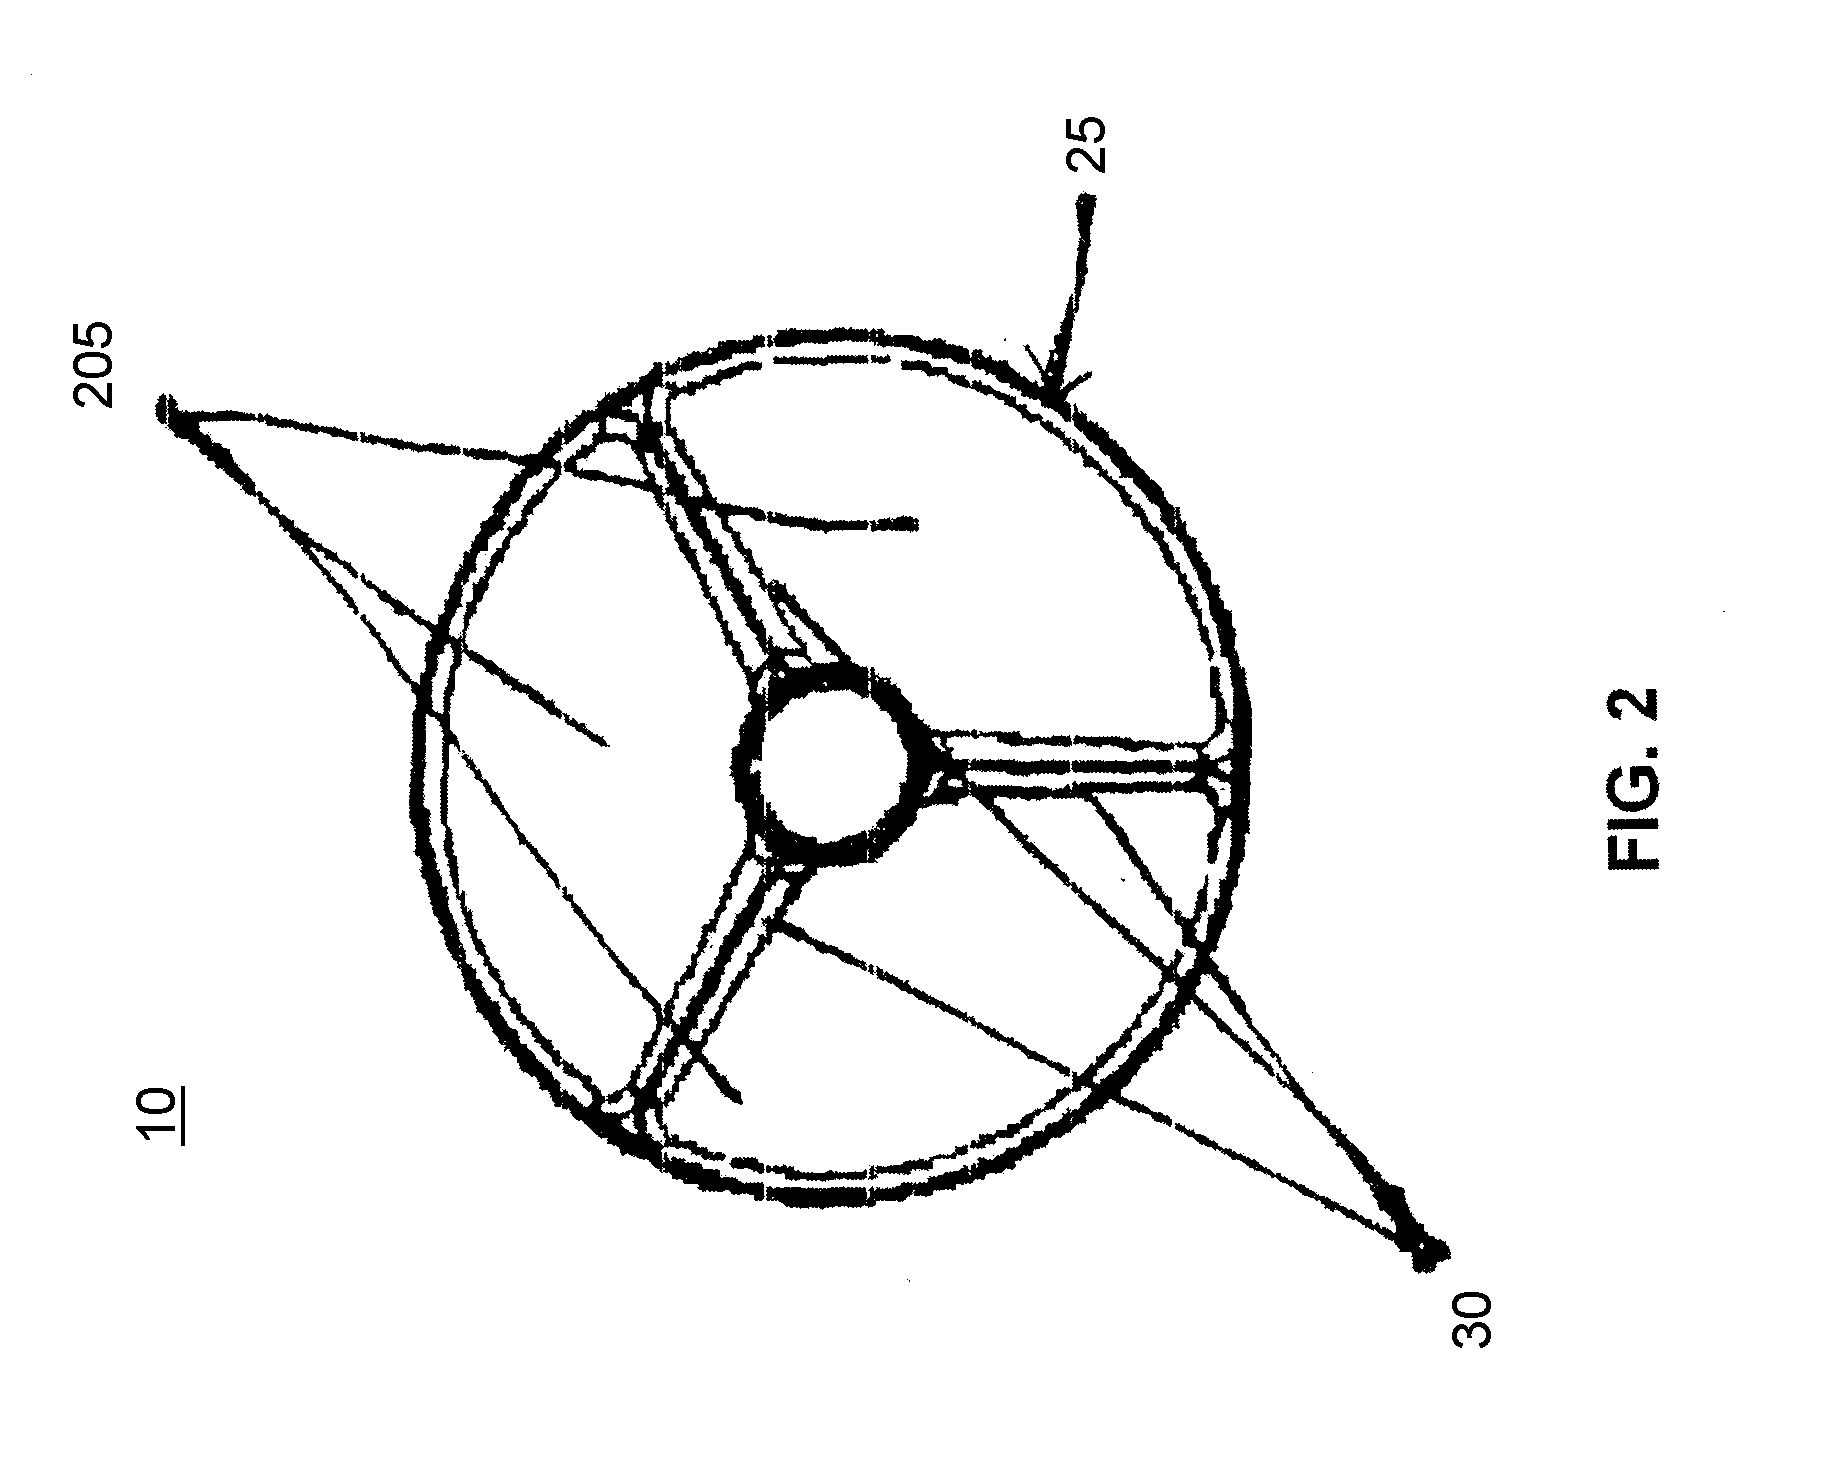 Variable drag projectile stabilizer for limiting the flight range of a training projectile